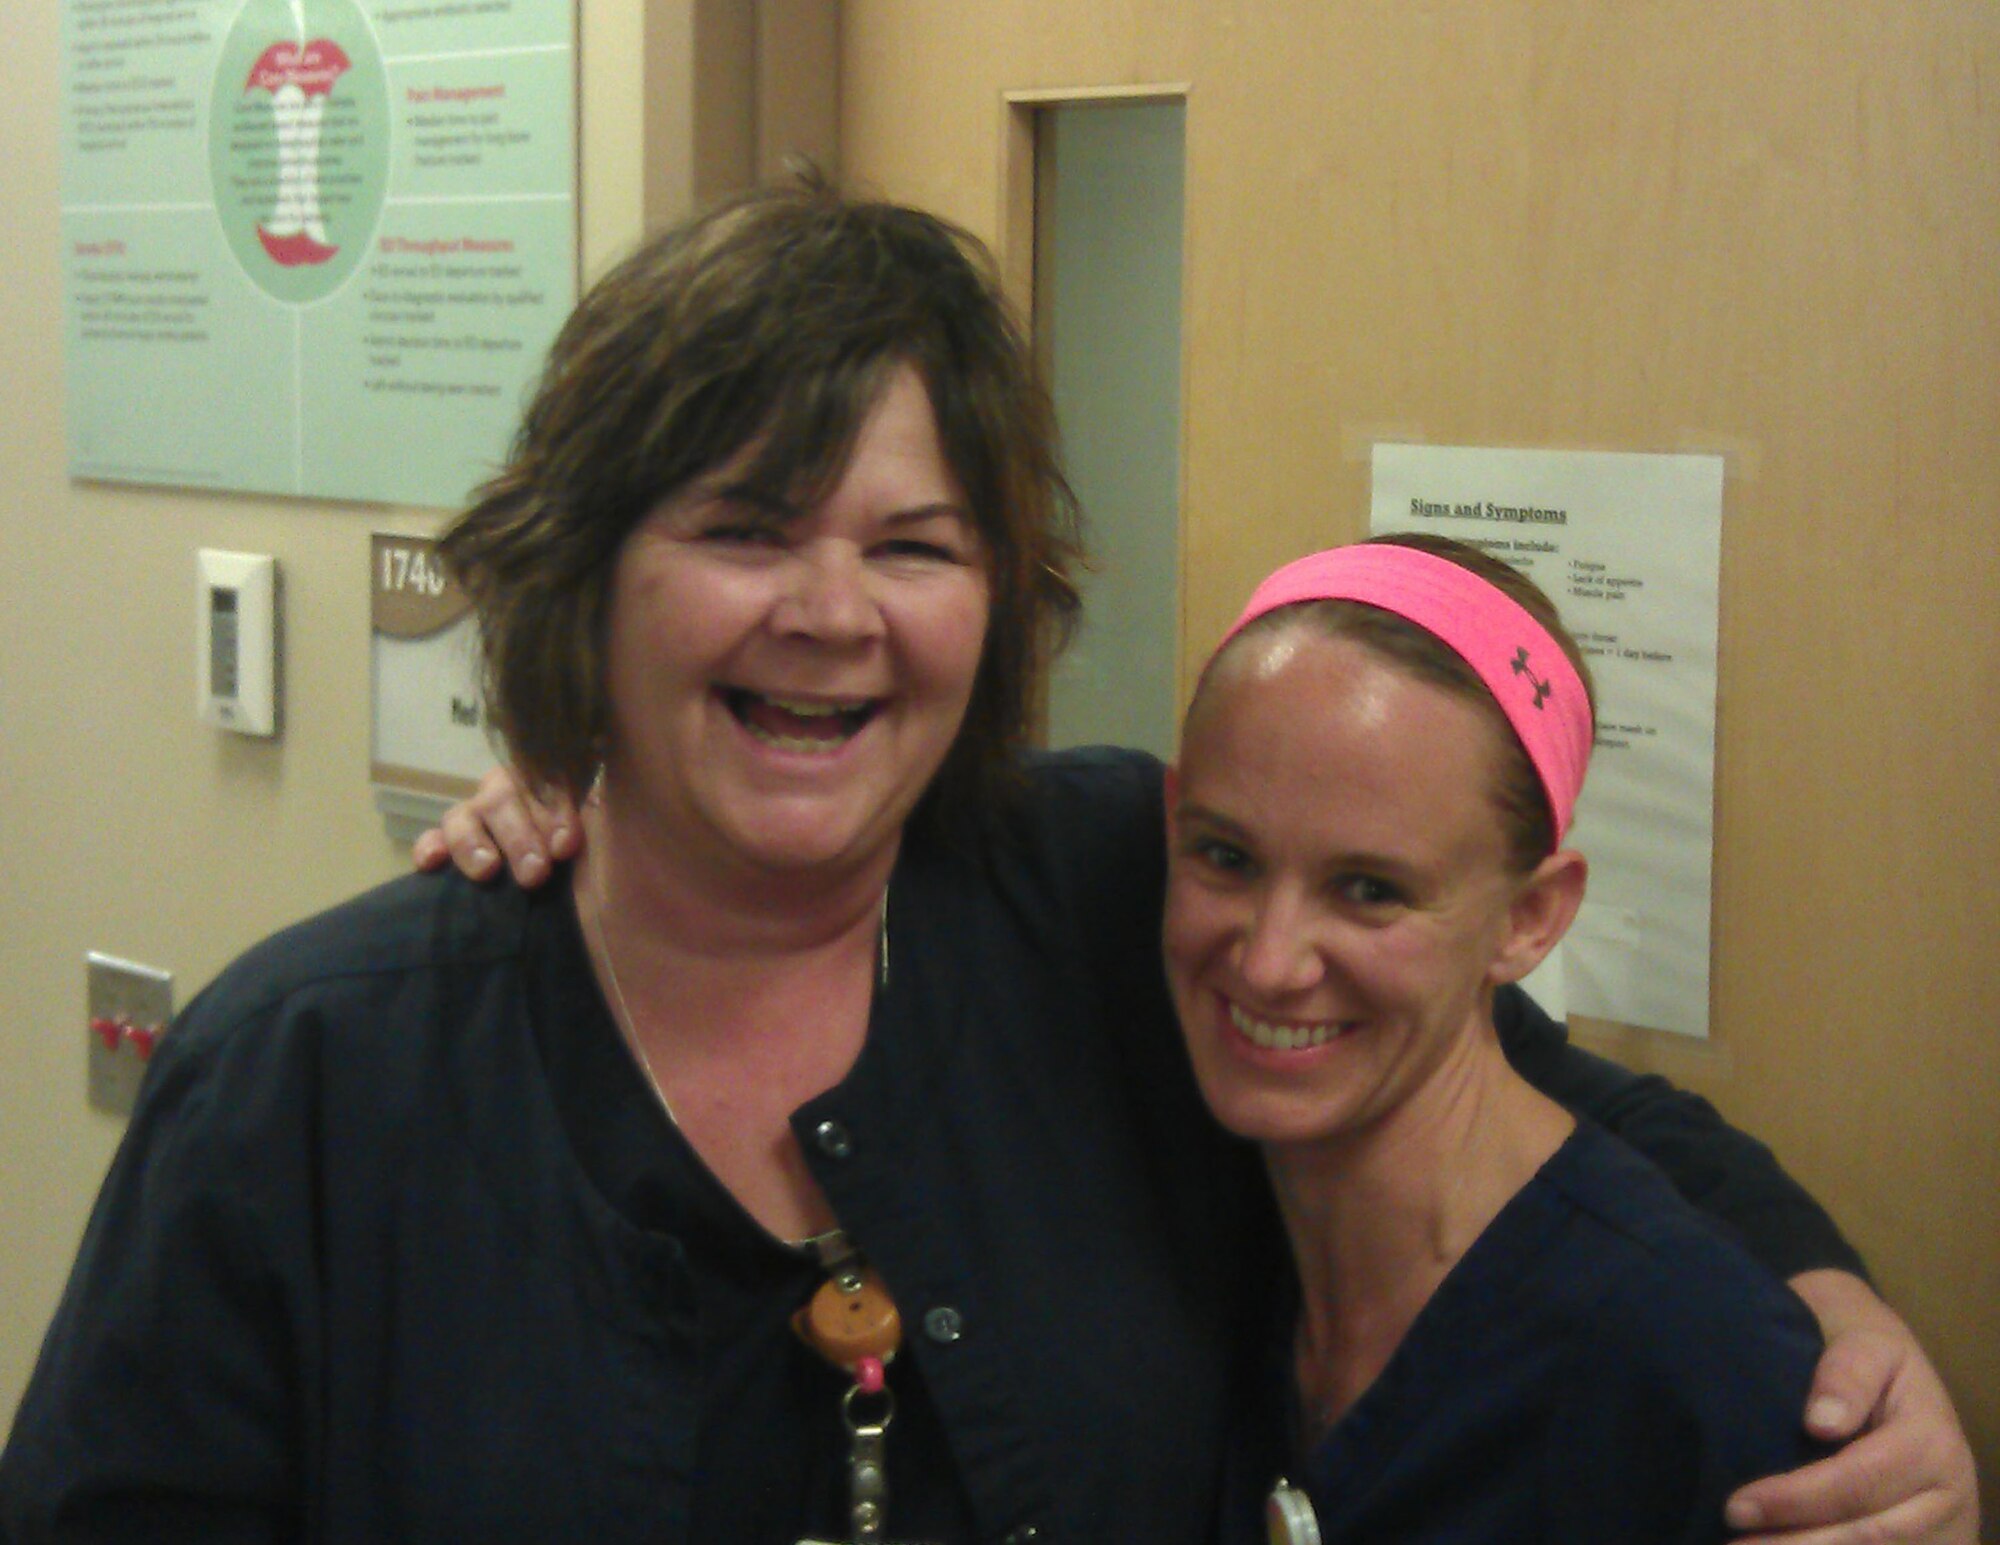 U.S. Air Force Capt. Amy Nordquist, right, poses for a photograph with Bonnie Starks. Nordquist and Starks work together at a local hospital.
 (Photo Courtesy of U.S. Air Force Capt. Amy Nordquist)